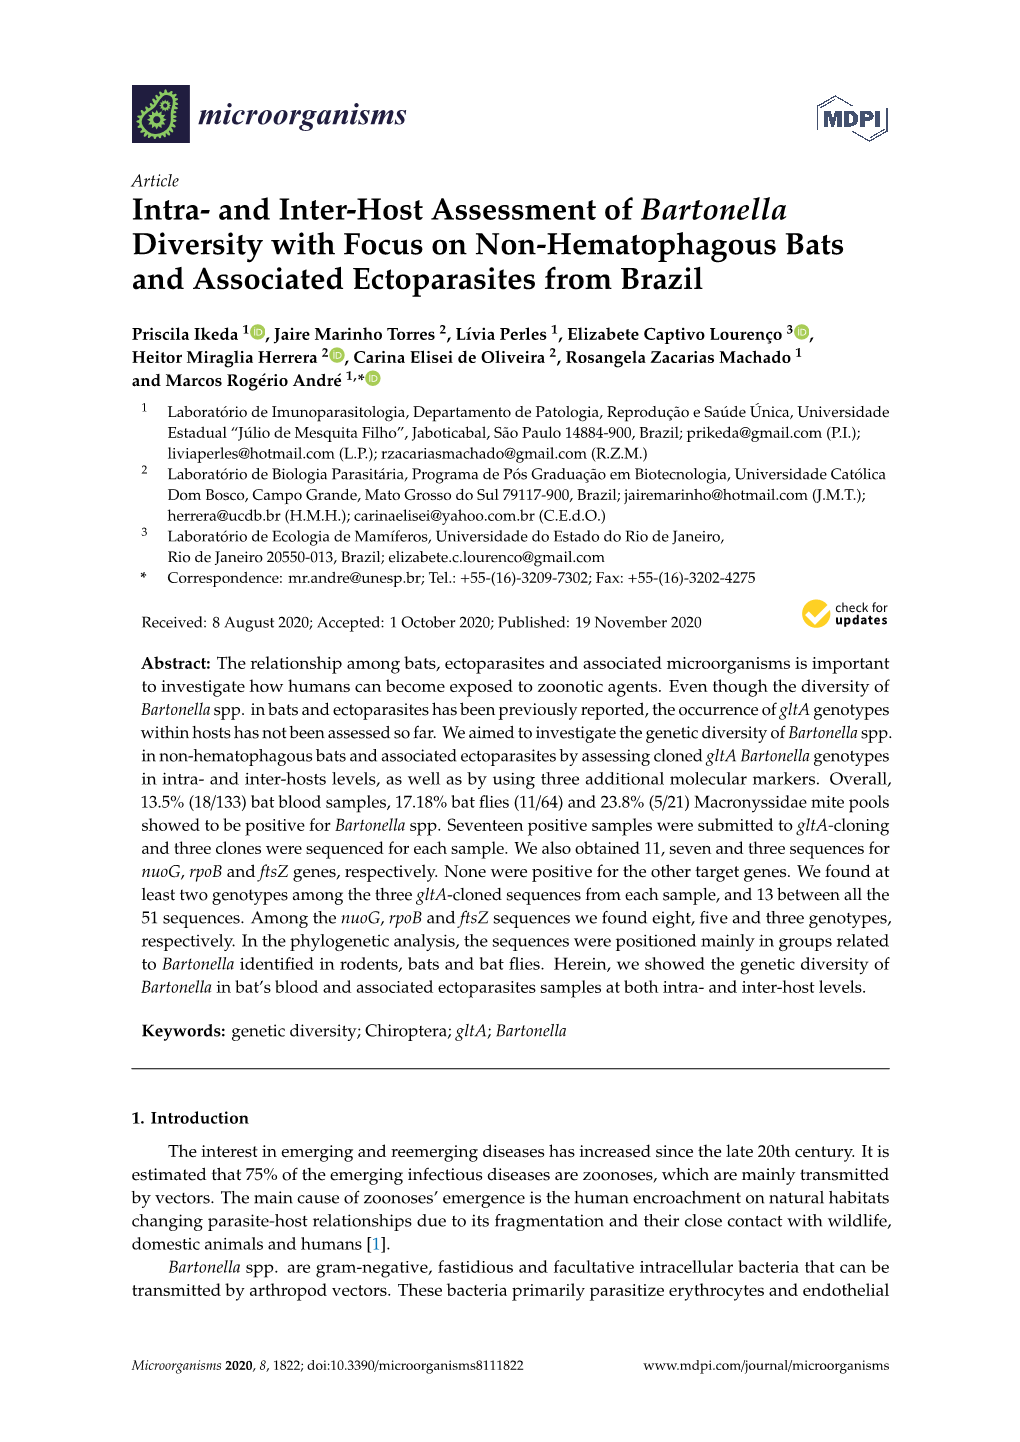 Intra- and Inter-Host Assessment of Bartonella Diversity with Focus on Non-Hematophagous Bats and Associated Ectoparasites from Brazil